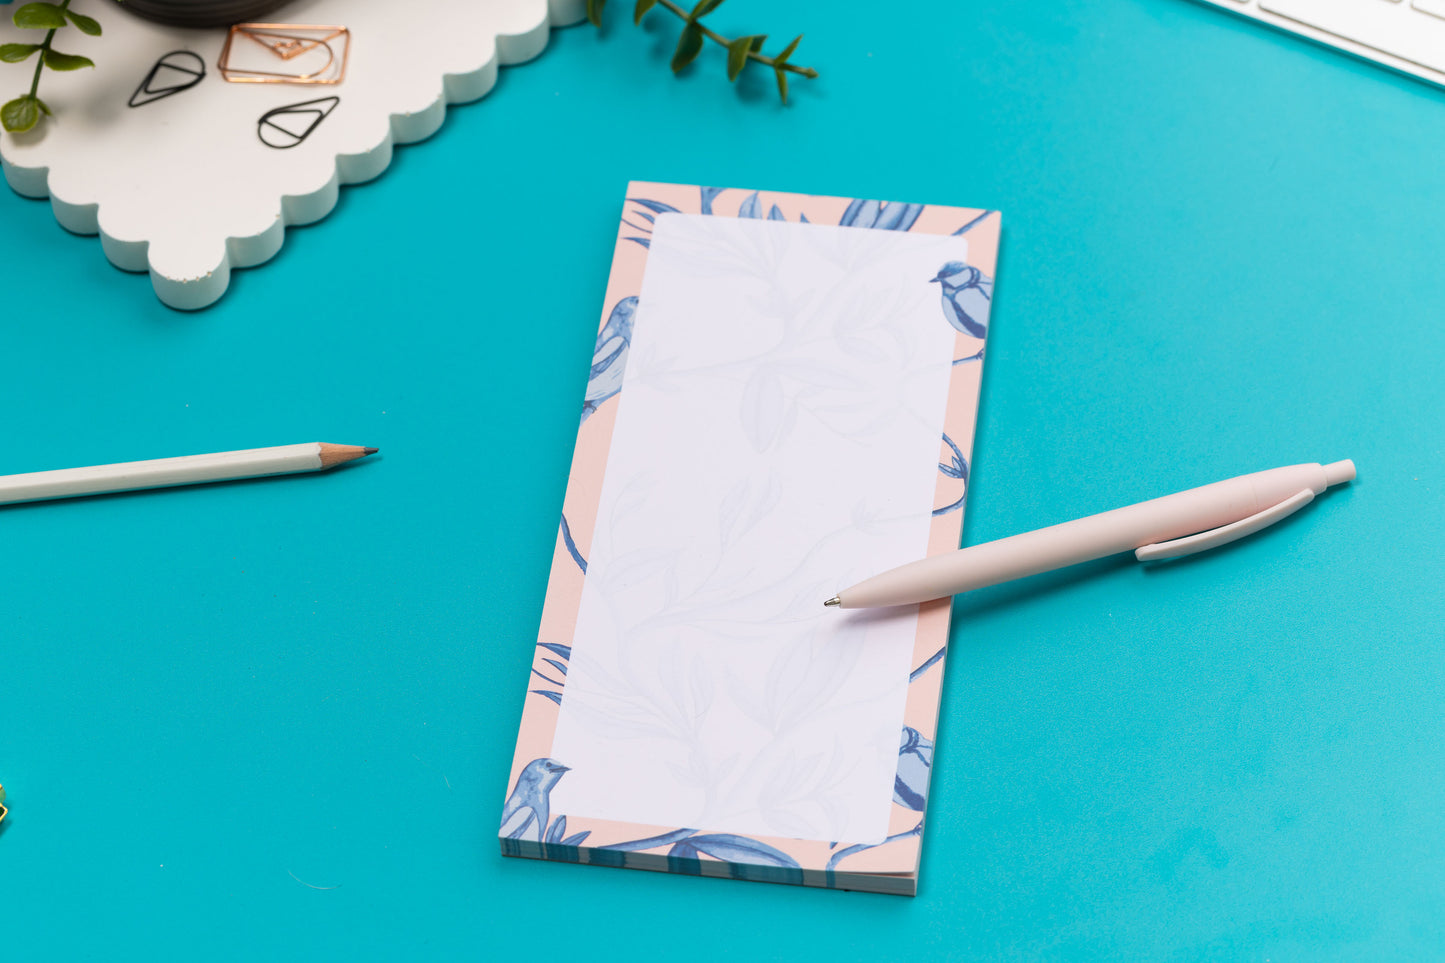 Brighton Birds List pad - Blush pink background with shades of blue bird and plant hand-painted motifs - is on a teal desk, next to a white pen, white keyboard and scattered paperclips.